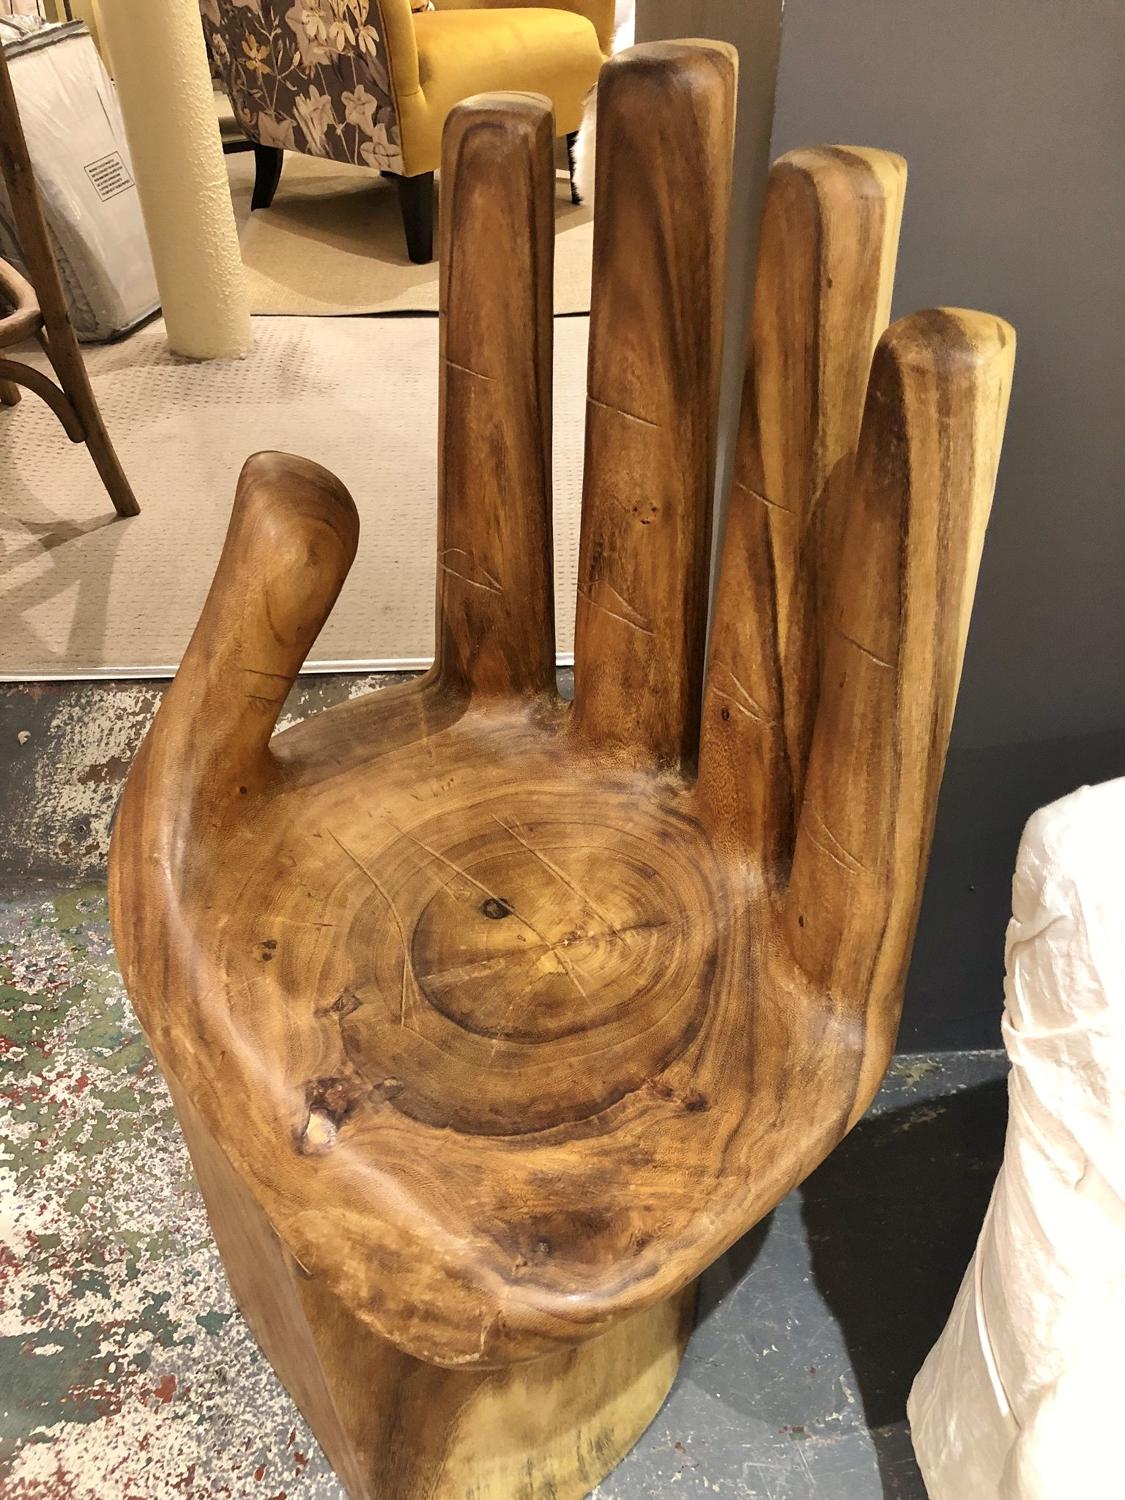 Carved hand chair